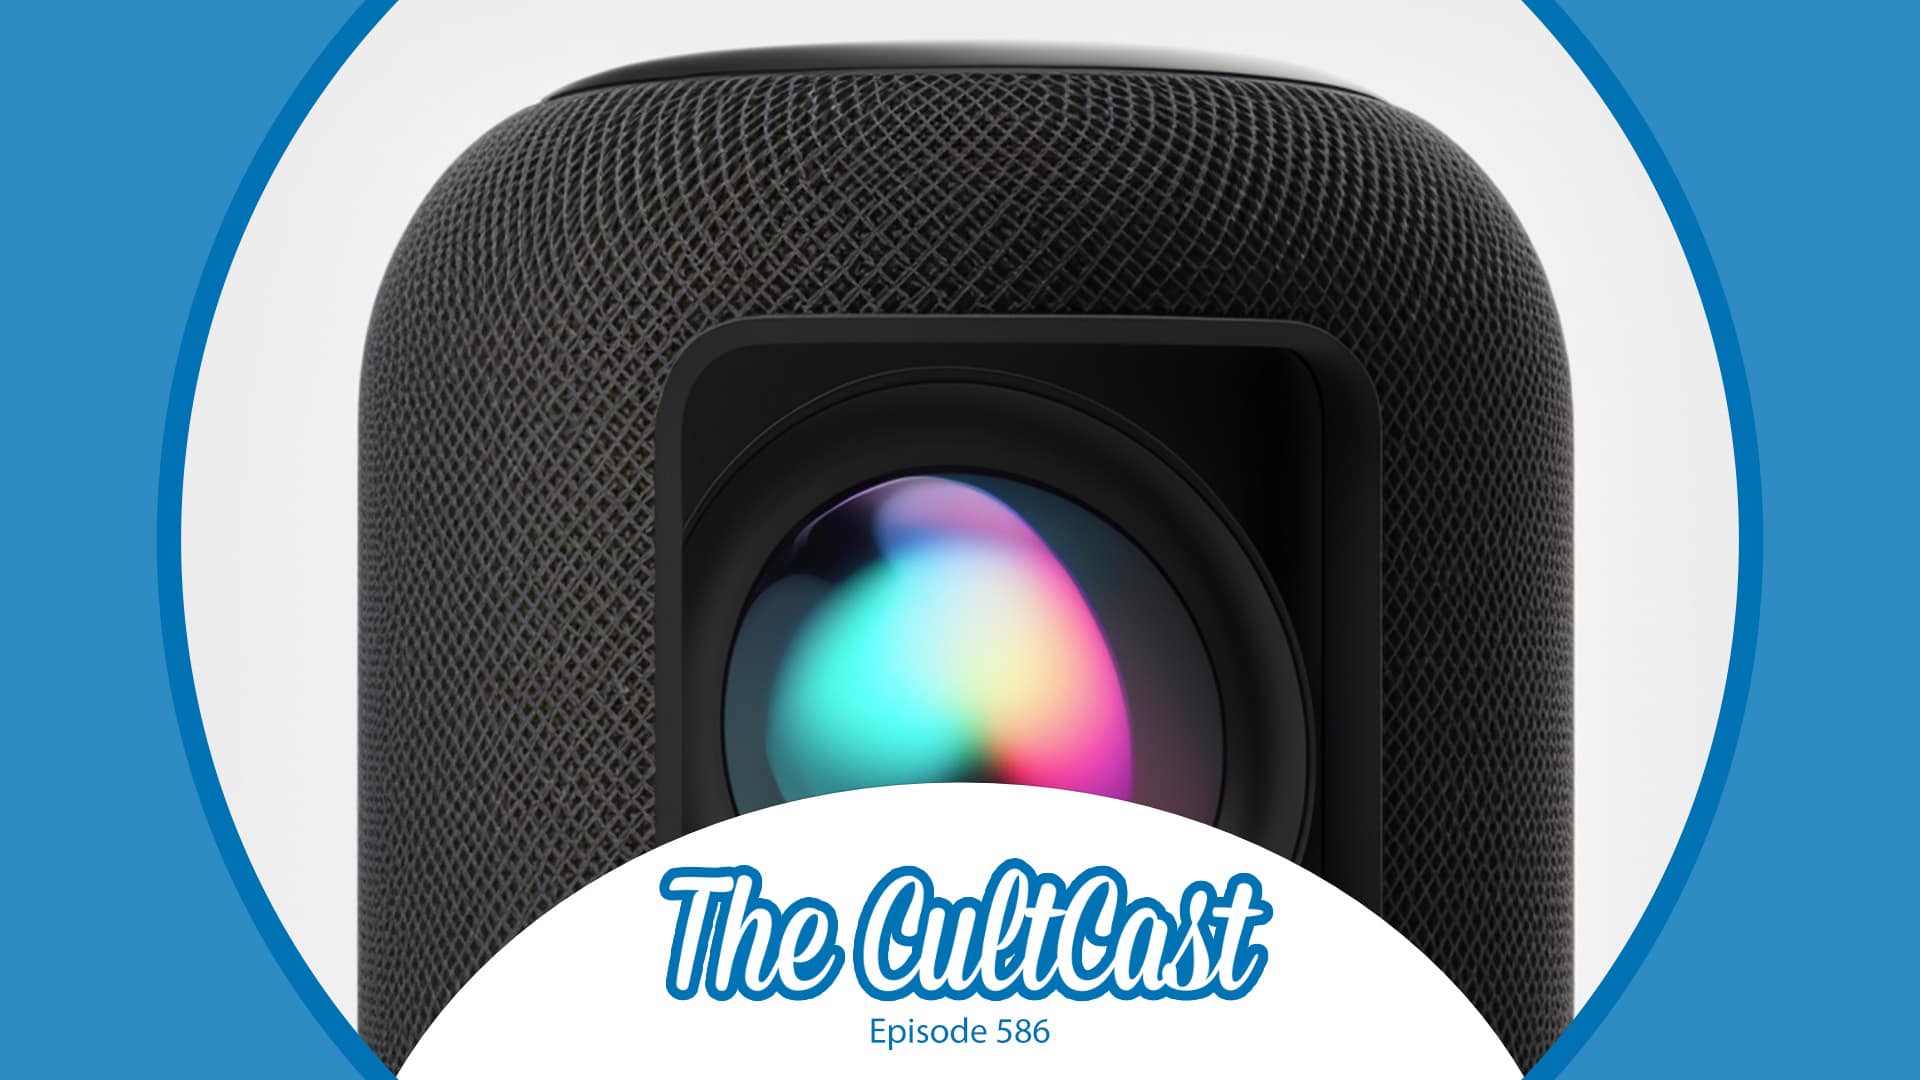 A HomePod with special skills + Tim Cook’s VR power play [The CultCast]